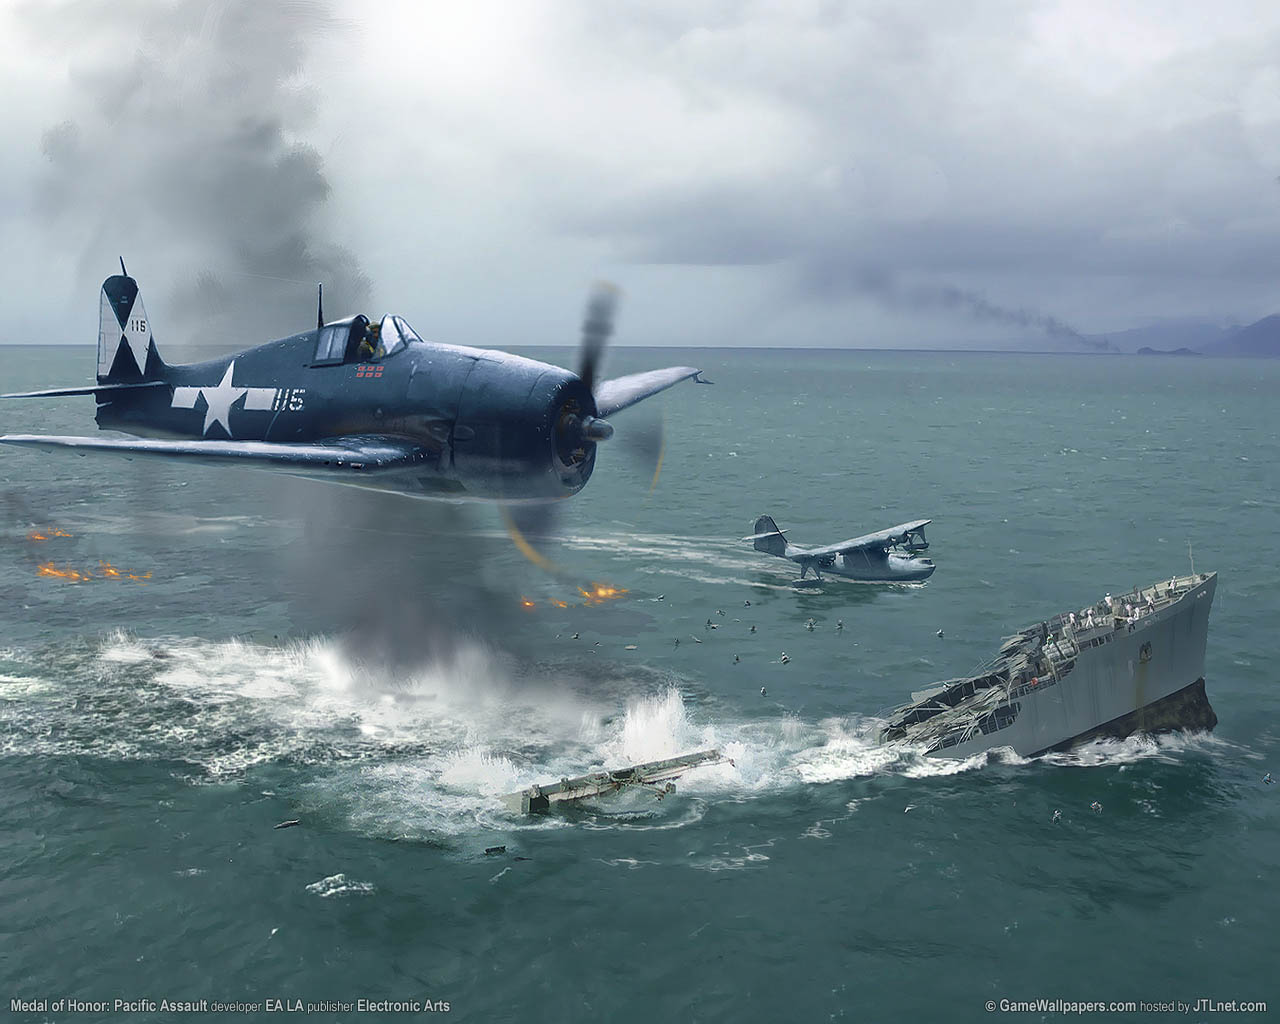 Medal of Honor%3A Pacific Assault wallpaper 04 1280x1024